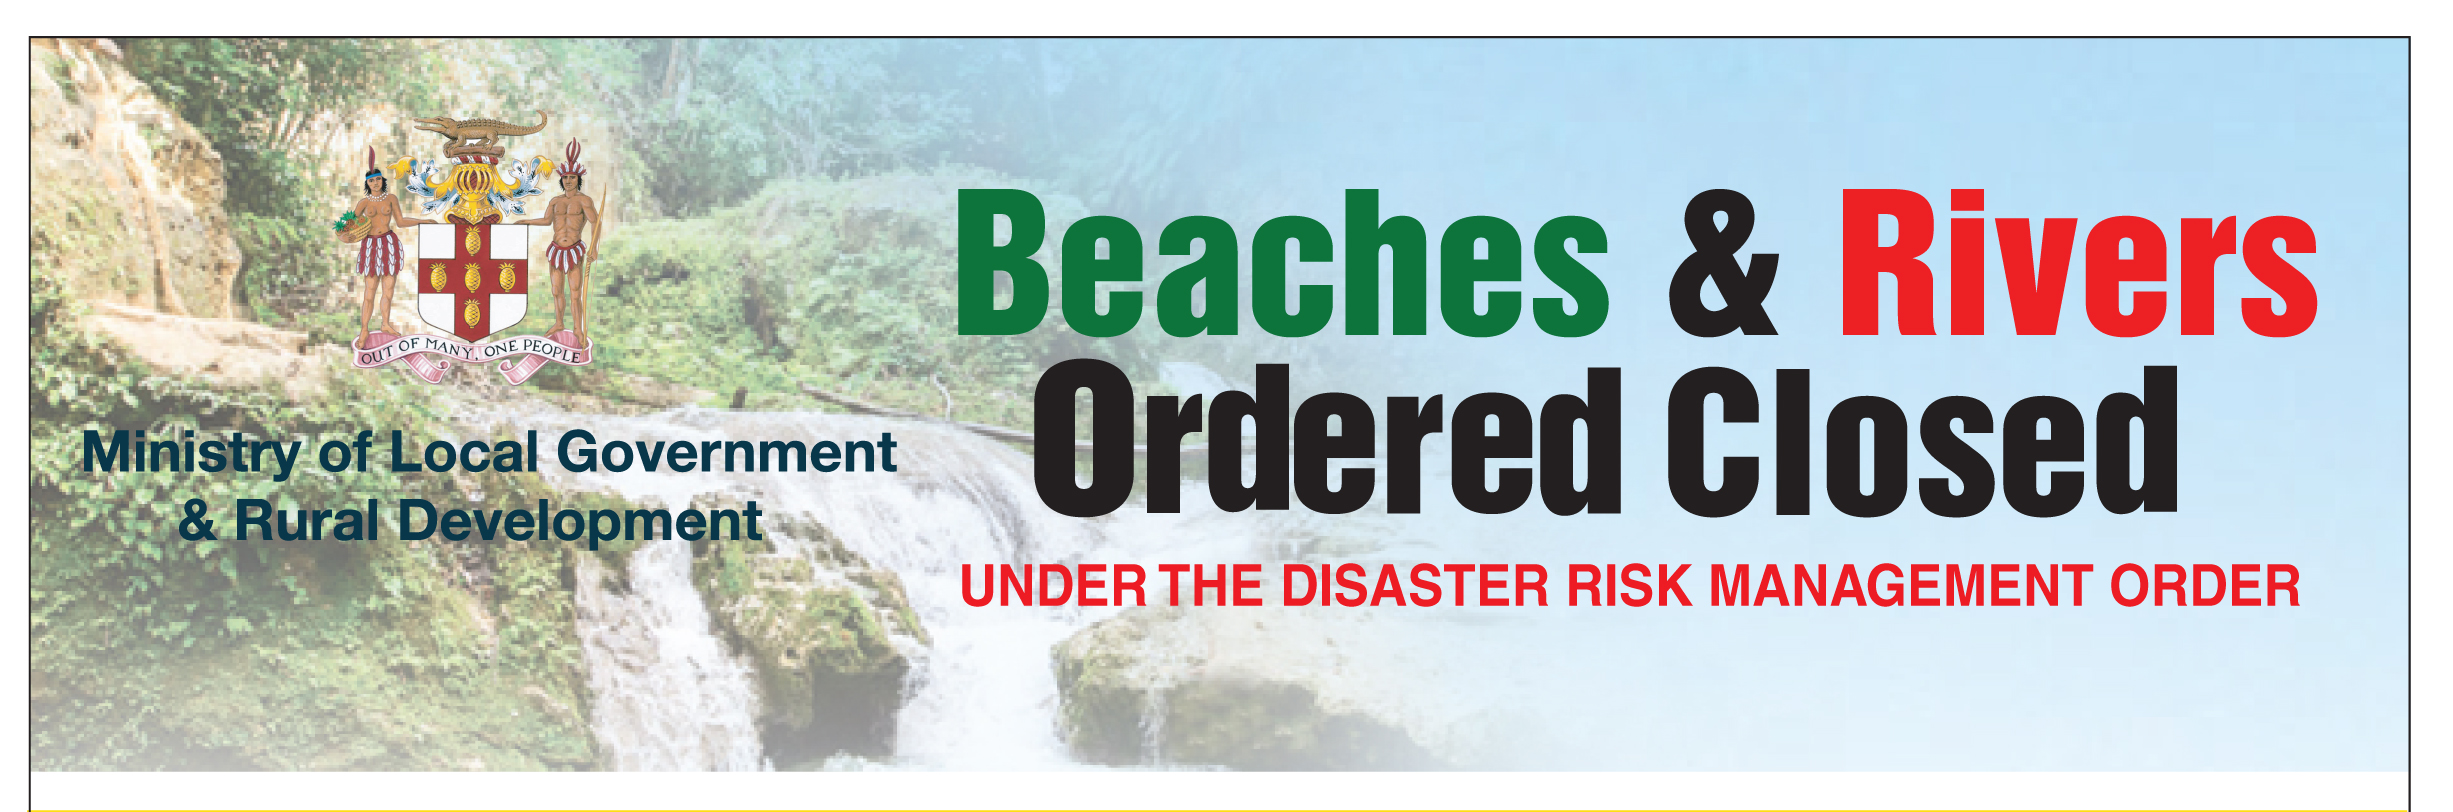 List of Beaches and Rivers ordered closed